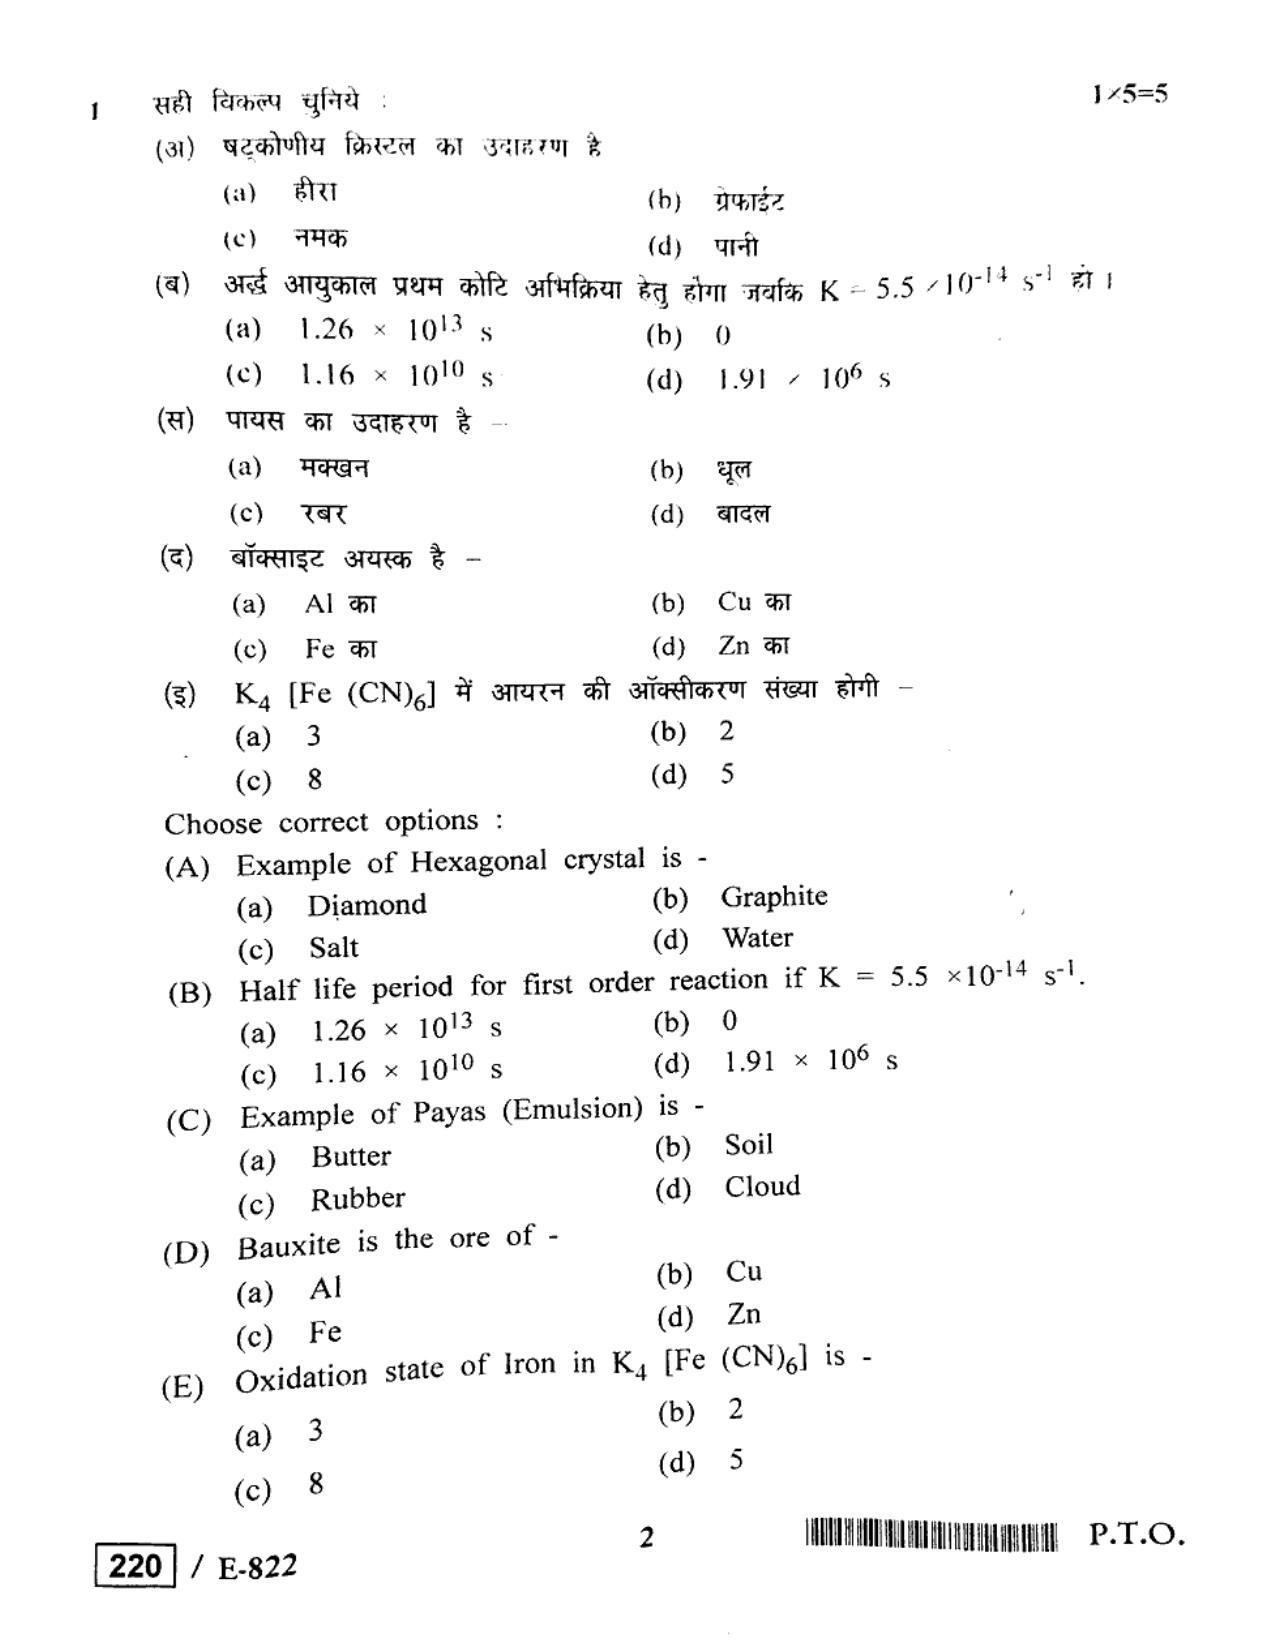 MP Board Class 12 Chemistry 2020 Question Paper - Page 2